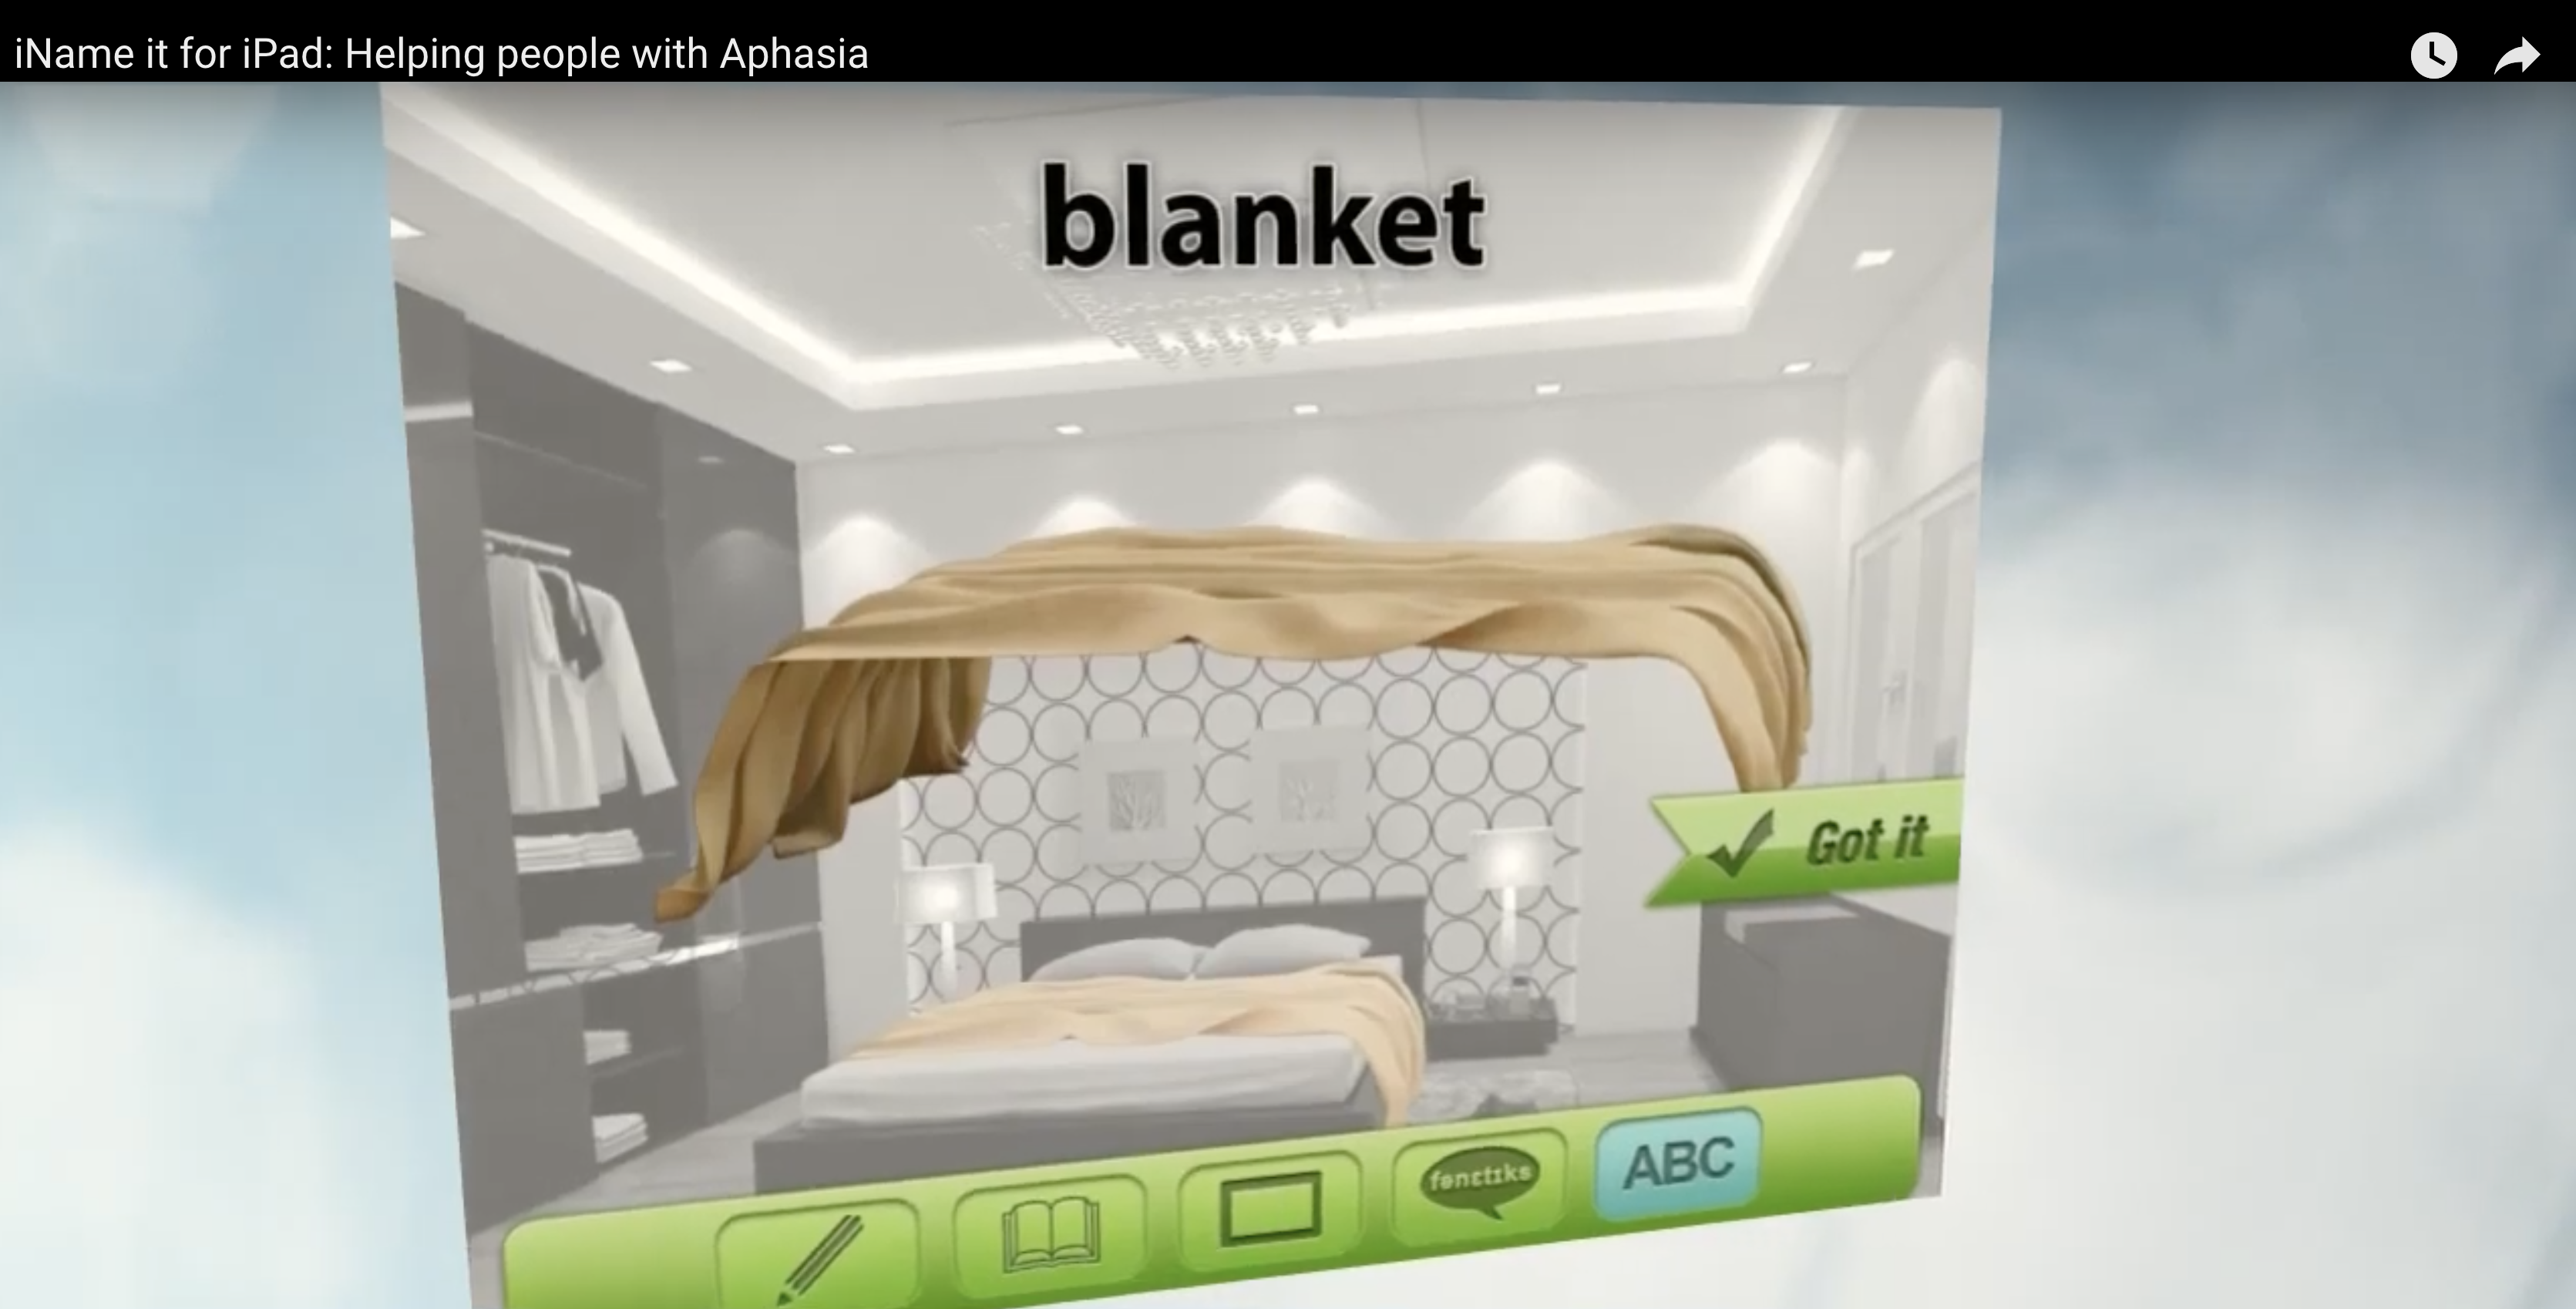 Screen shot from iName it. Has the word blanket at the top of the screen and a blanket shows on screen